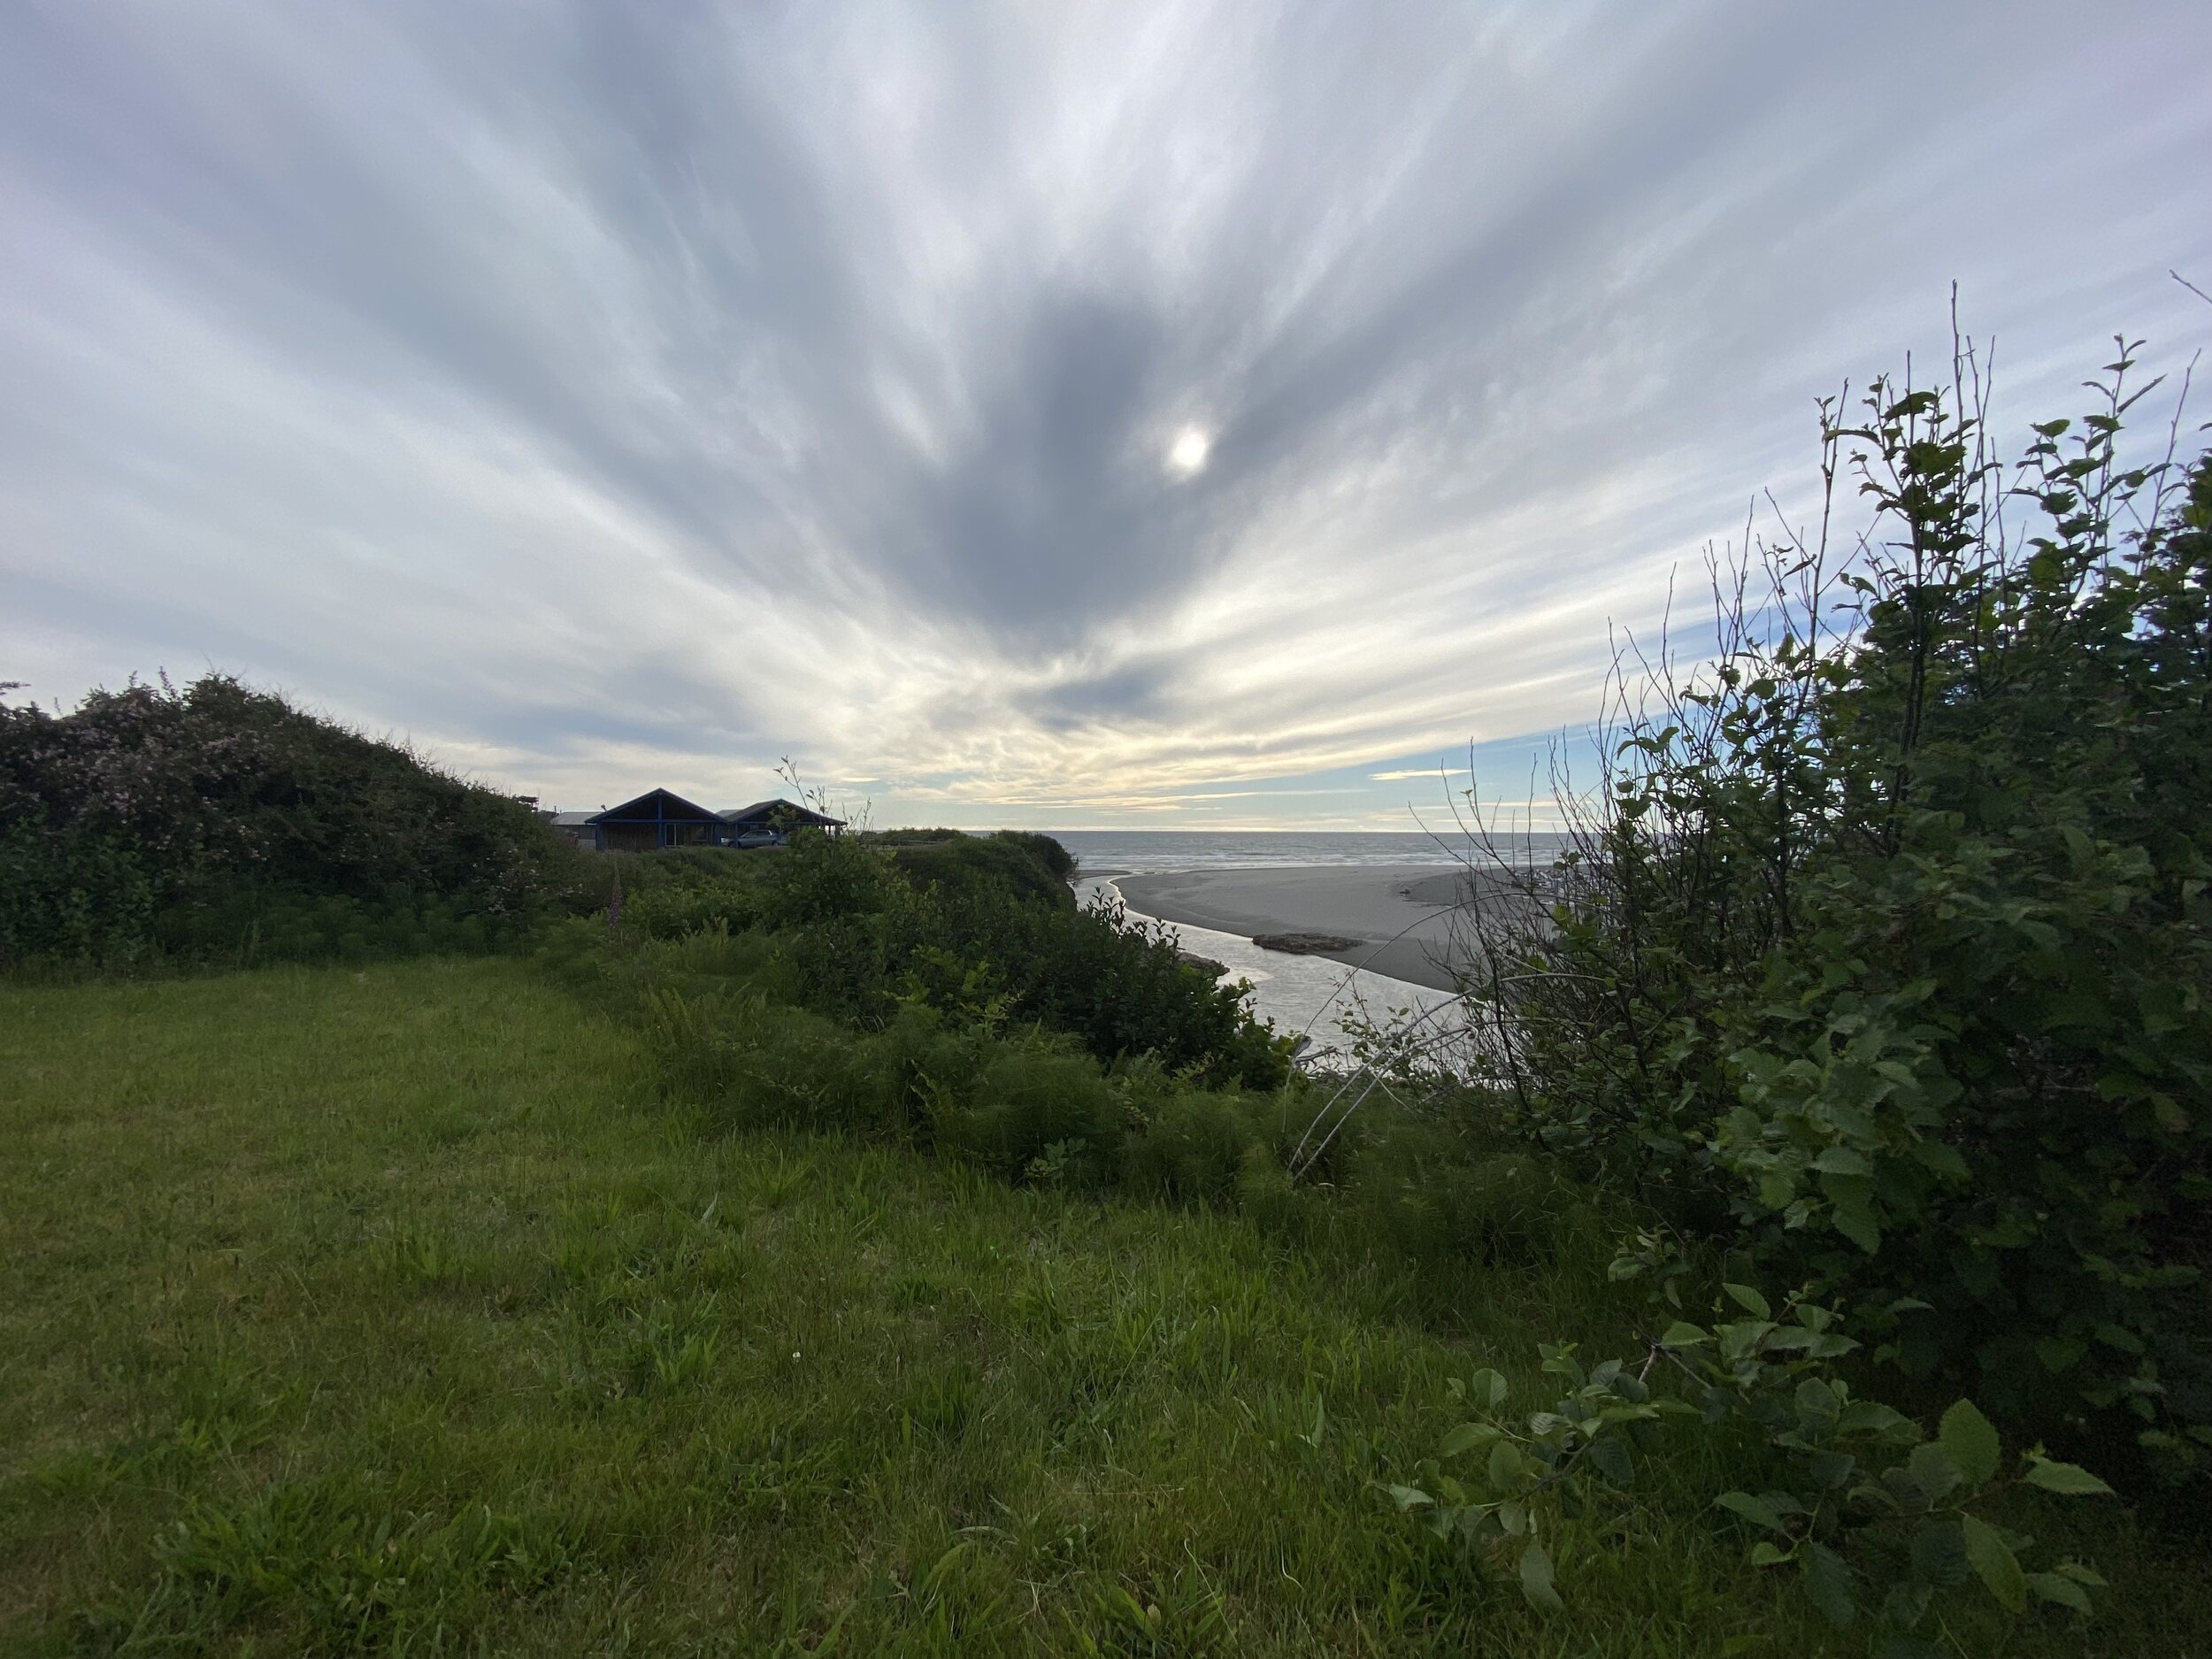 Gorgeous view from the side lawn at the Kalaloch Lodge.  Photo by Karen Boudreaux, June 17, 2021